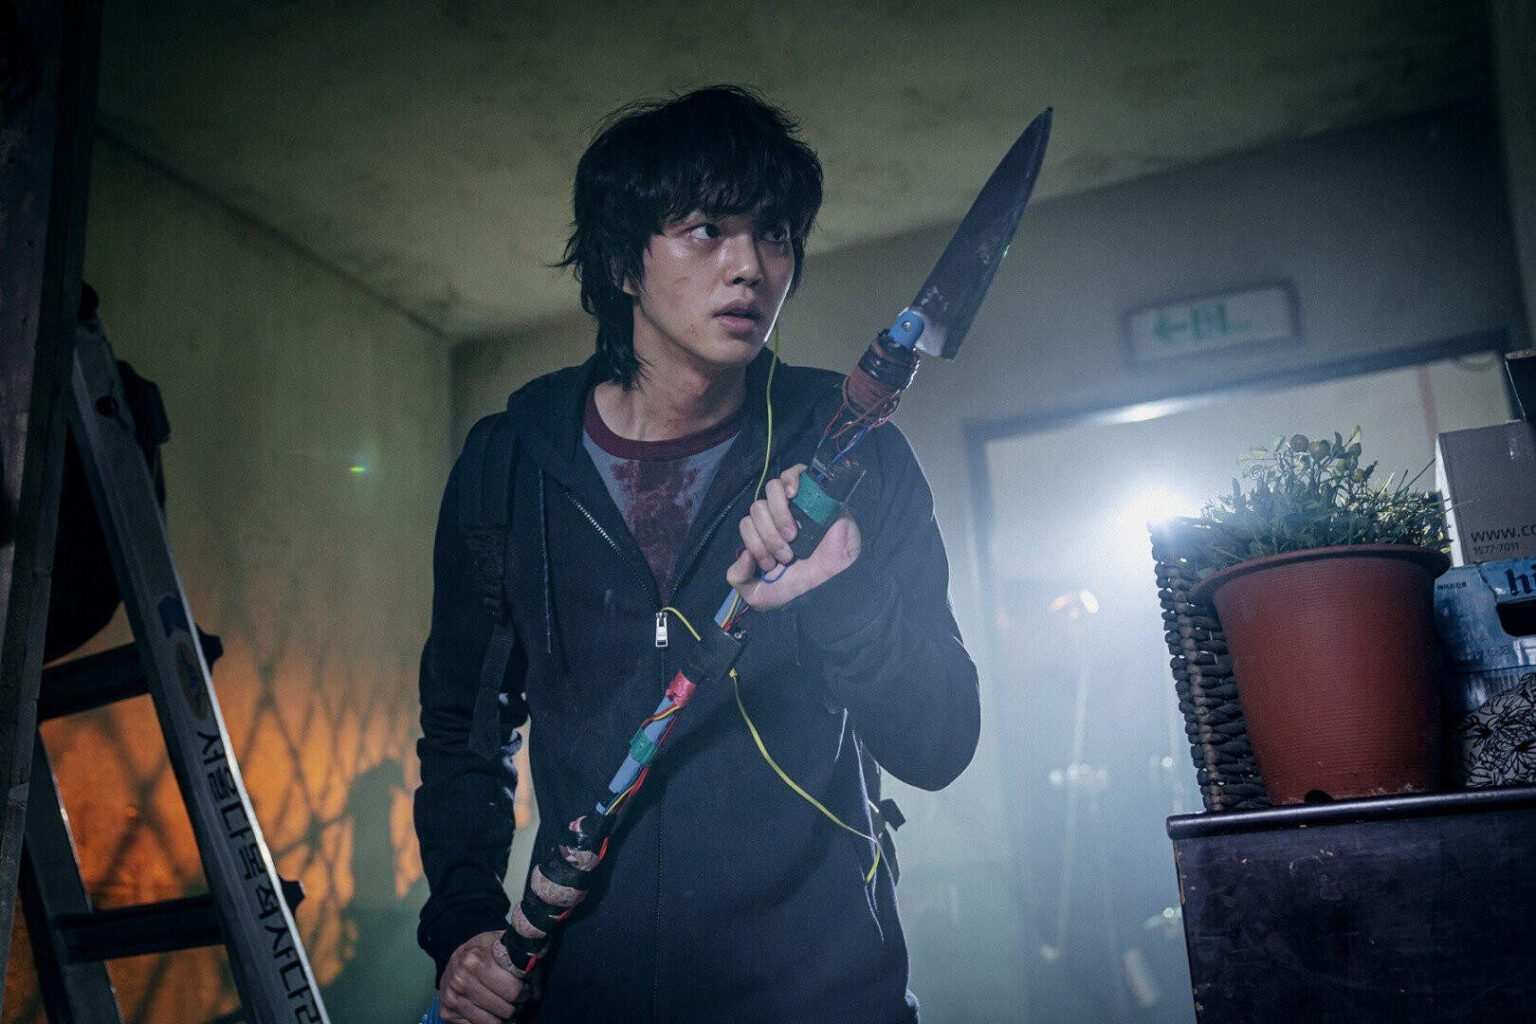 Not all K-dramas on Netflix are about romance. Add these Korean shows streaming now, including thrillers, horror, and sci-fi stories to your watch list!